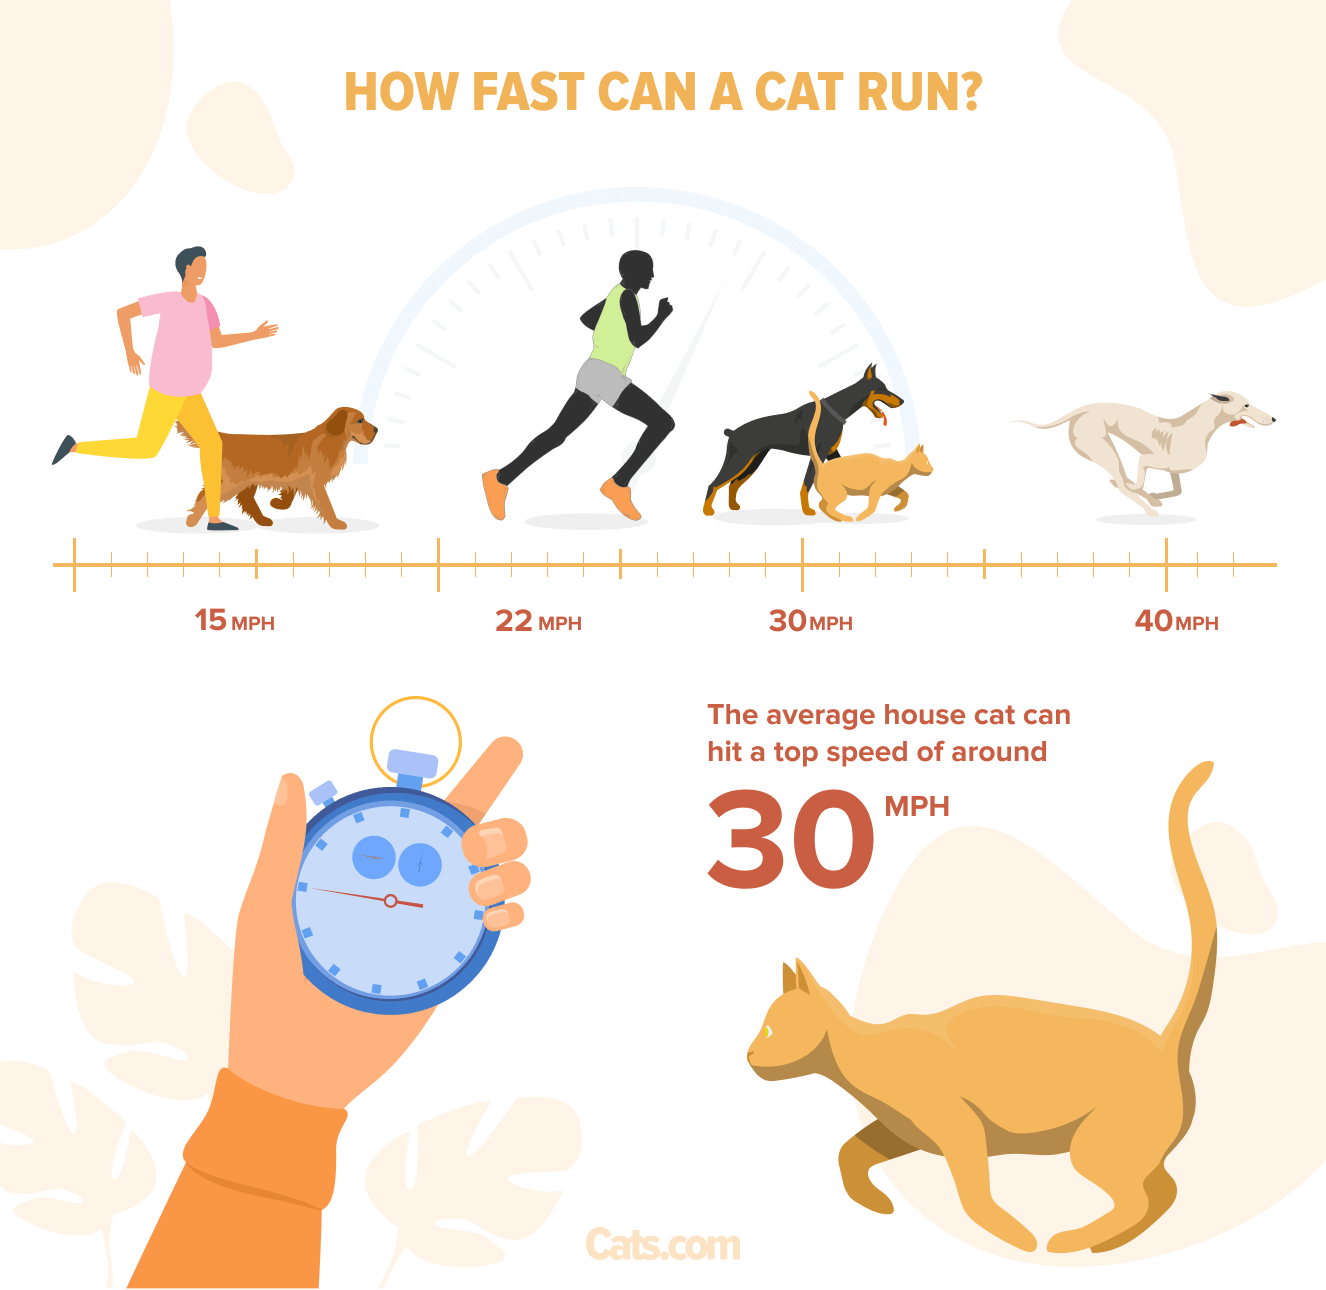 Informative graphic depicting the impressive speed of a cat's running ability.